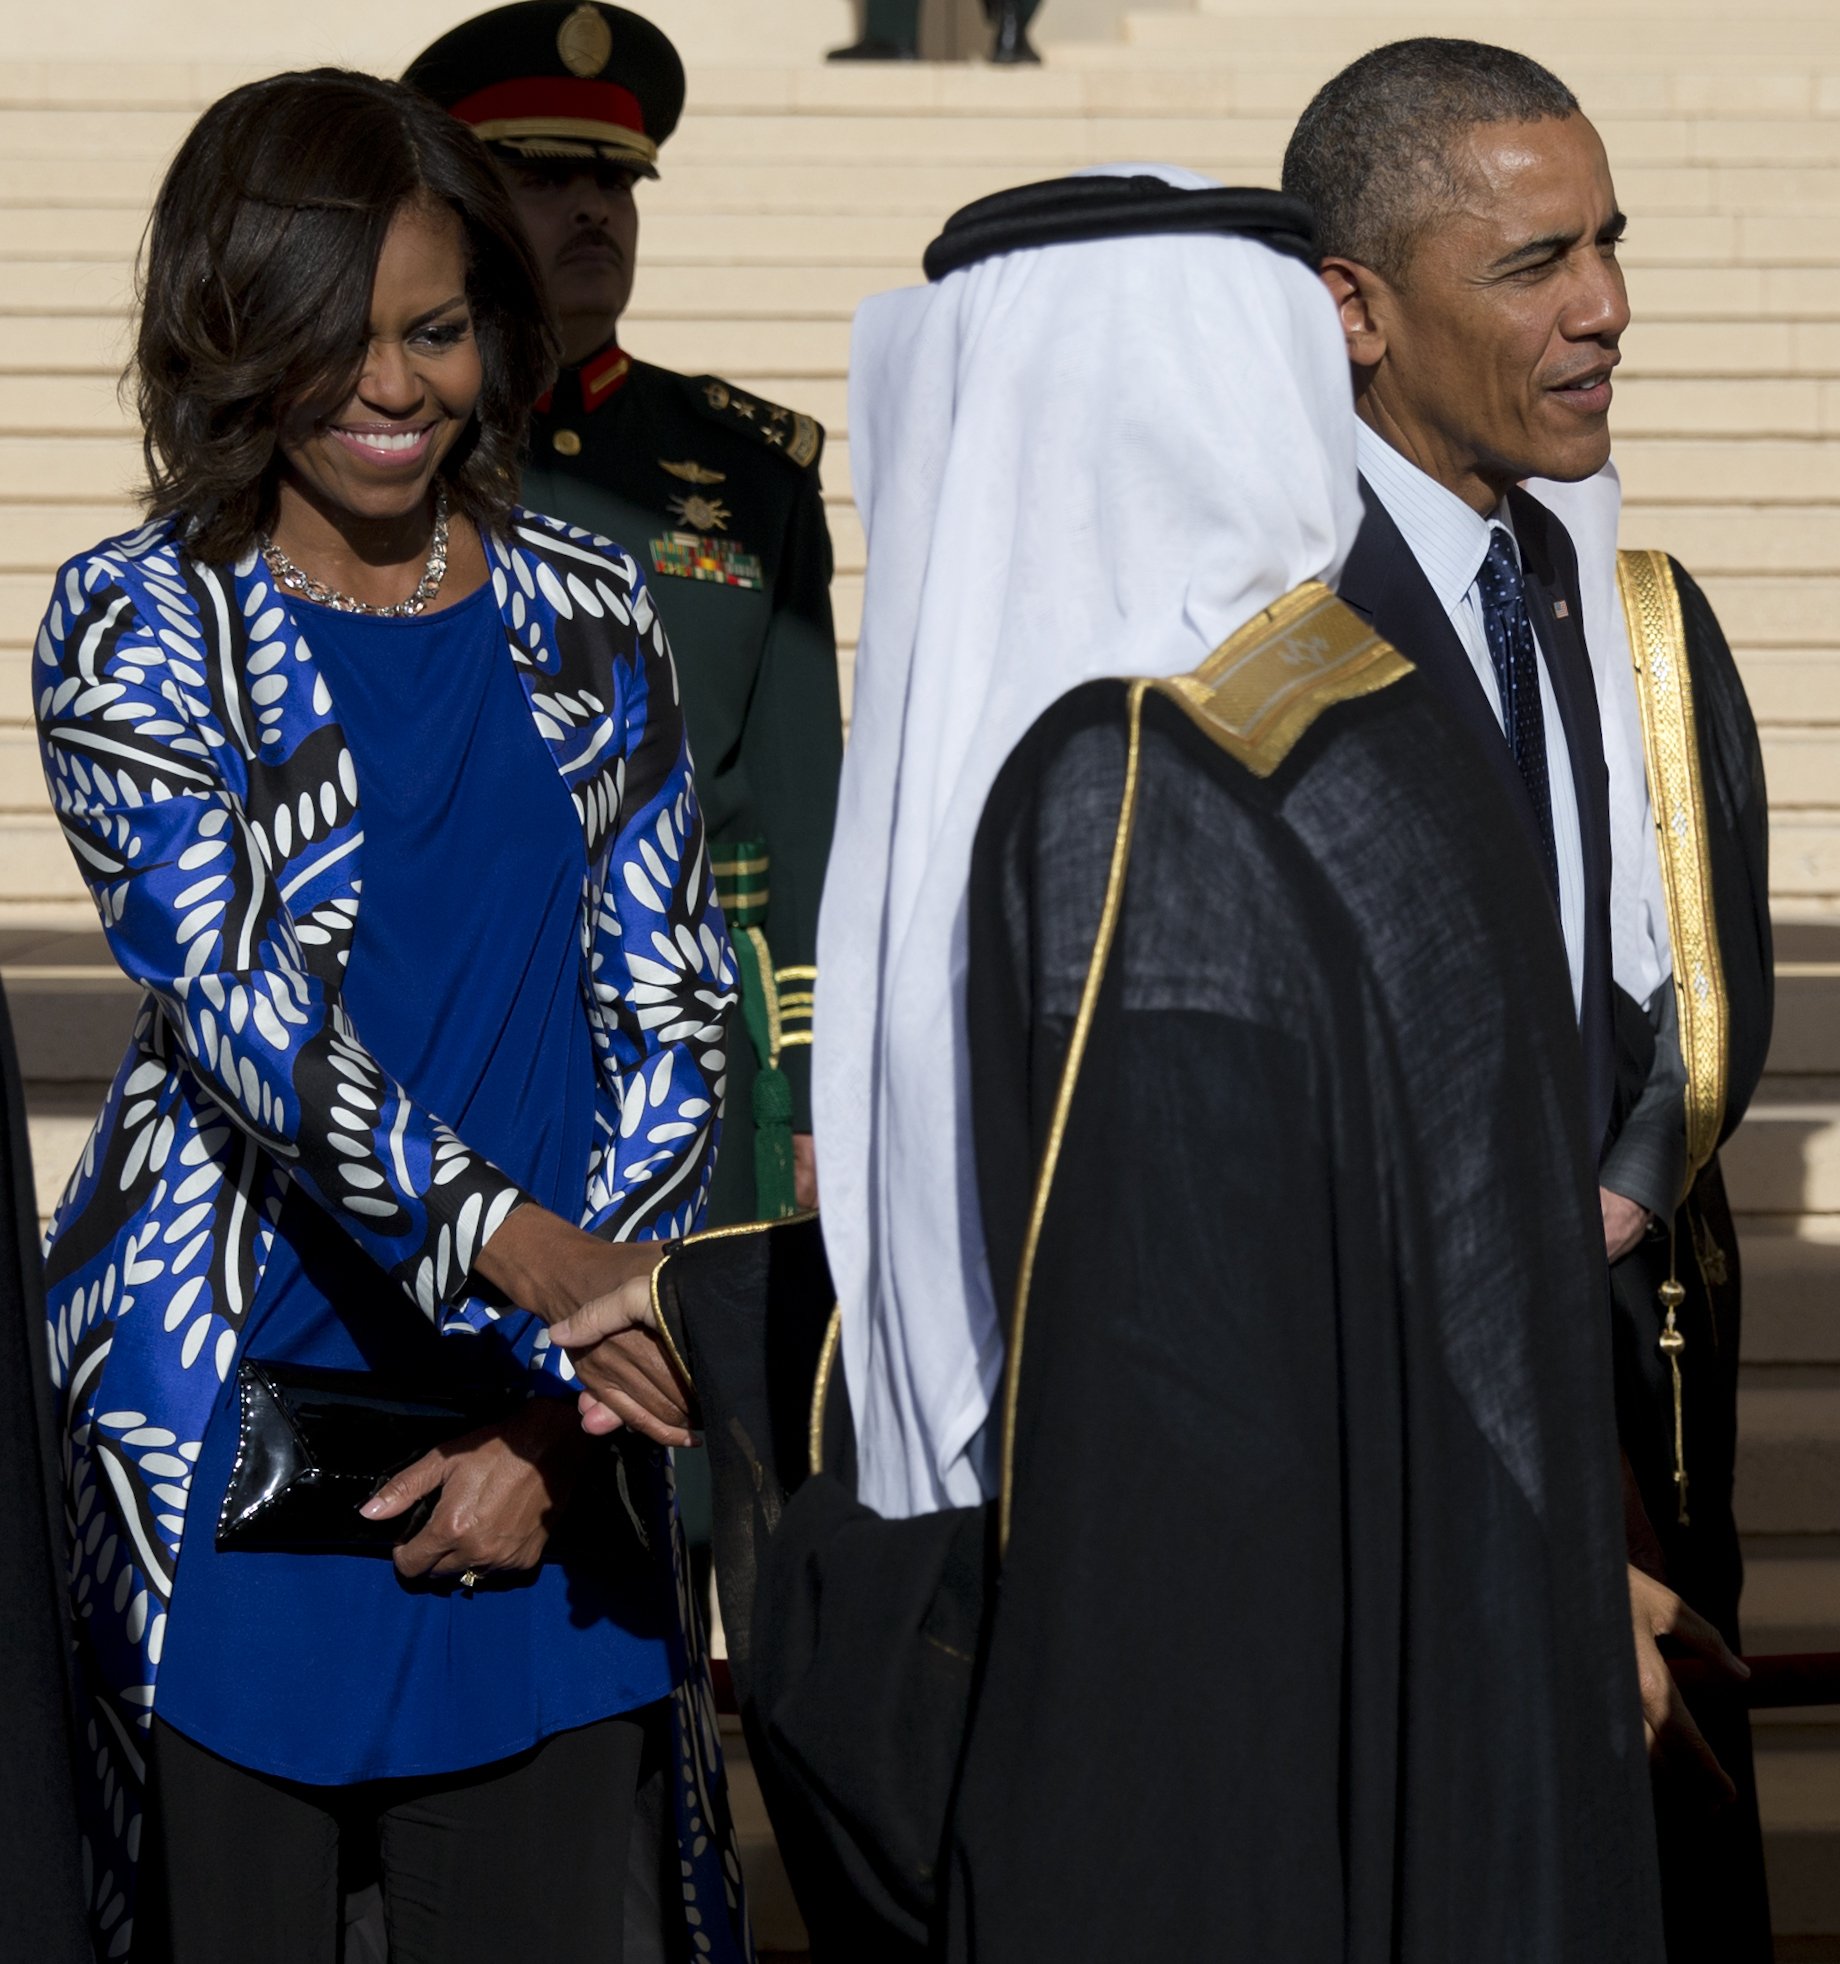 President Barack Obama and first lady Michelle Obama stand with new Saudi King Salman bin Abdul Aziz for a receiving line as they arrive at King Khalid International Airport, in Riyadh, Saudi Arabia on Jan. 27, 2015.